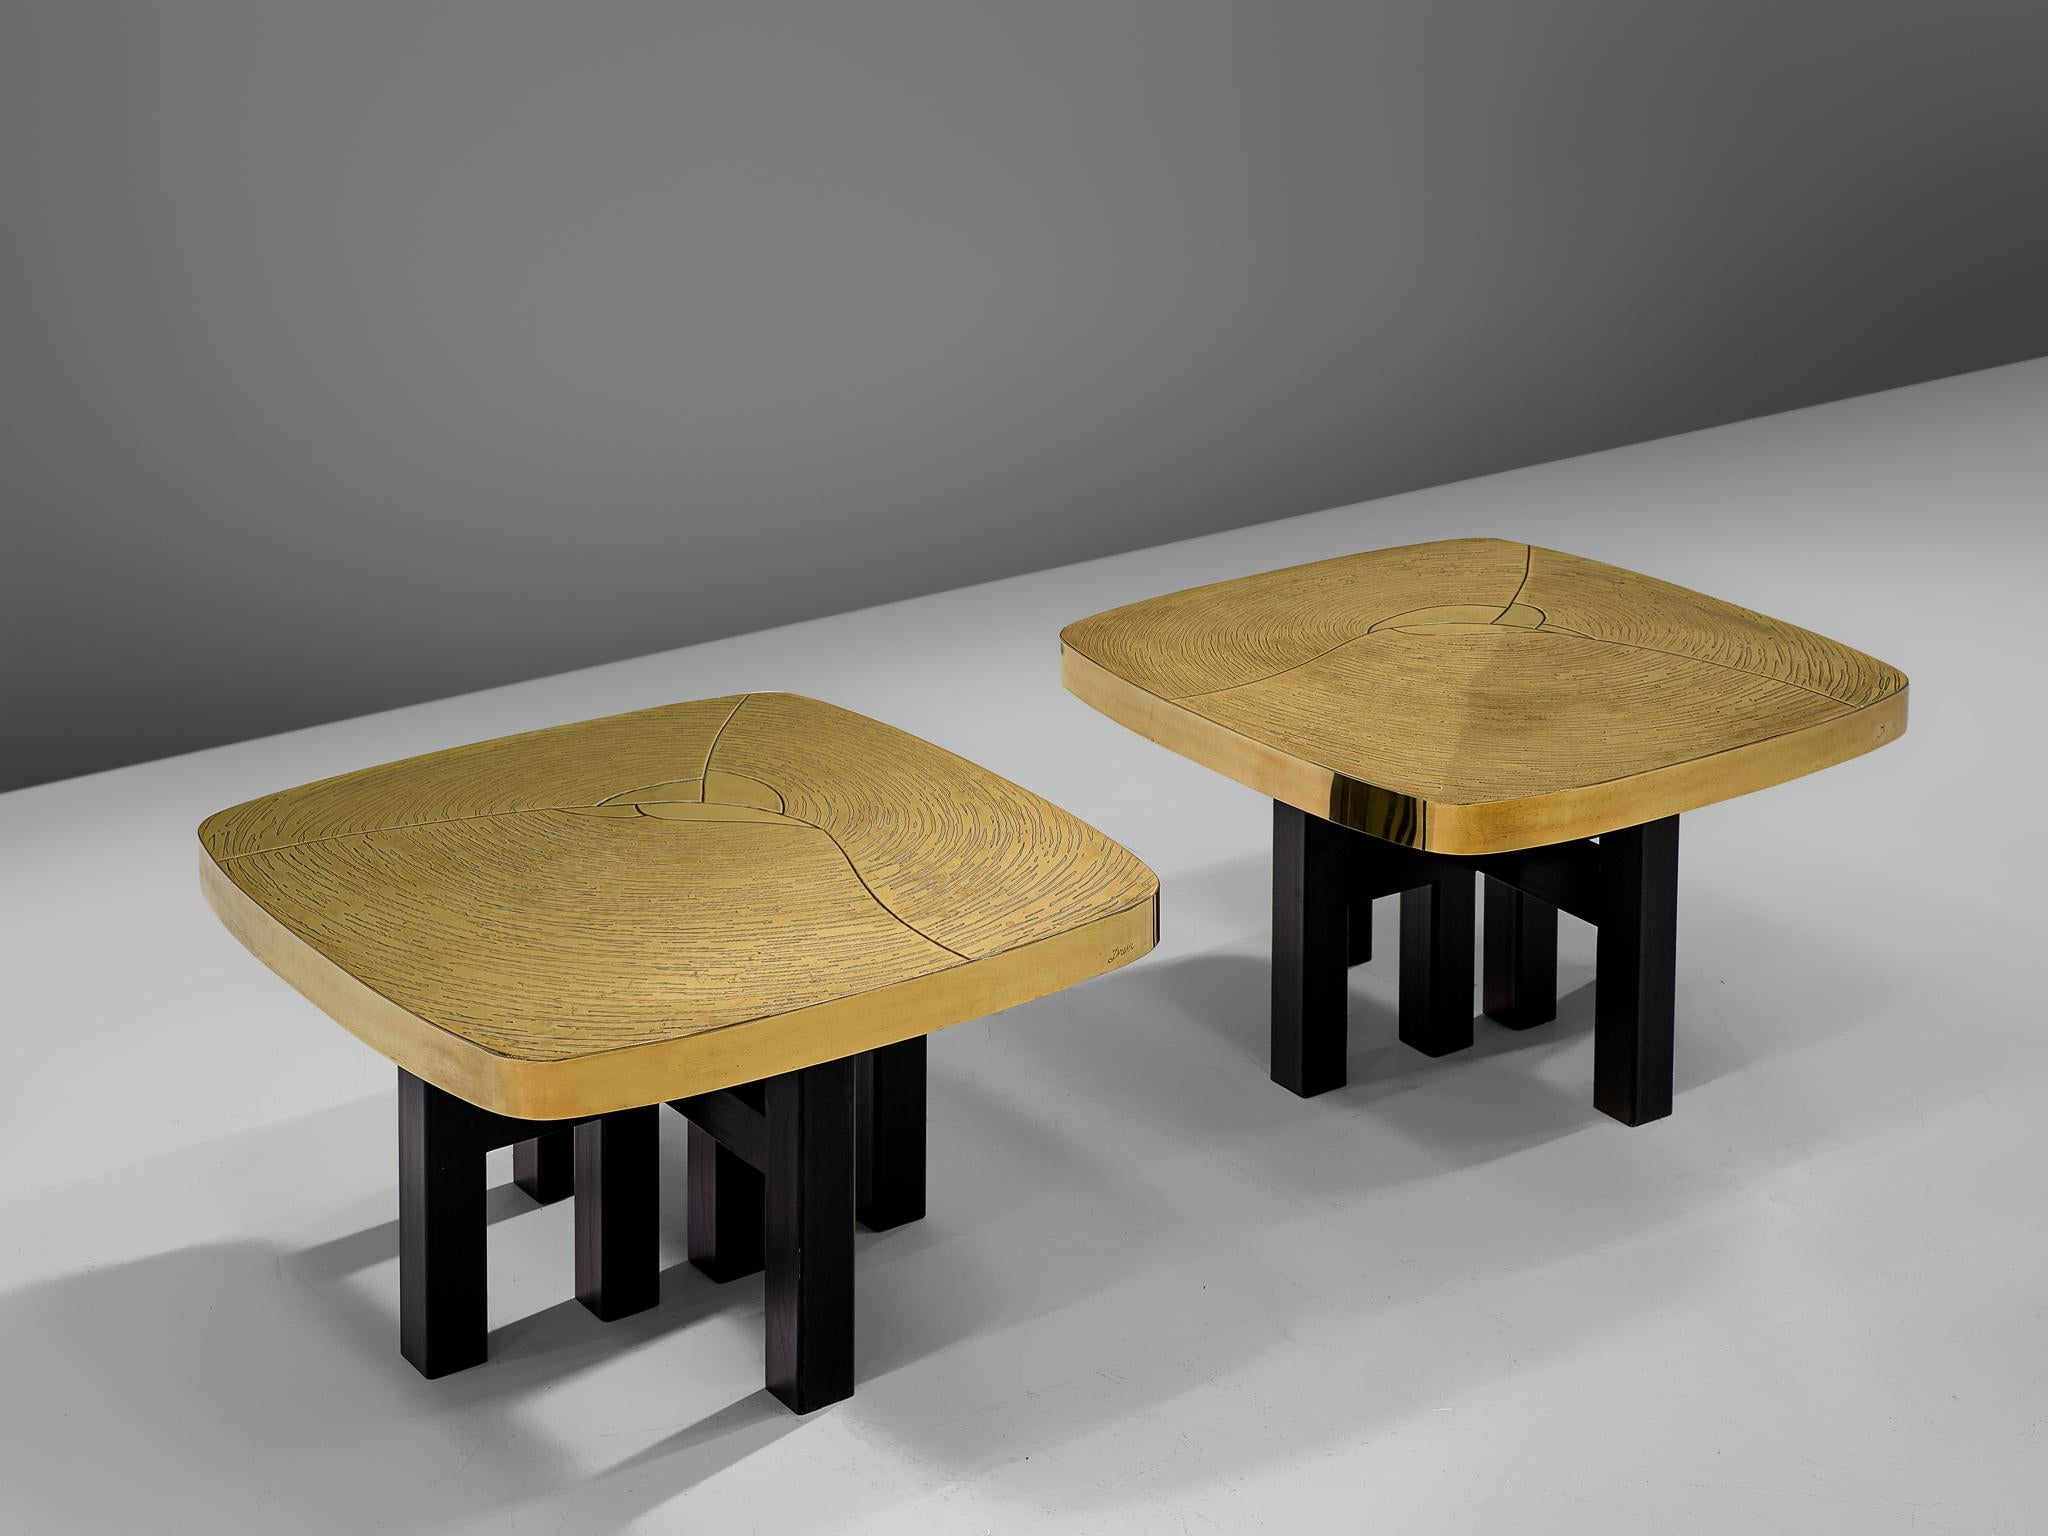 Jean Claude Dresse, side tables, brass, lacquered steel, Belgium, circa 1976

A luxurious pair of squared side tables, crafted with high attention for detail which is characteristic for the work of the Belgian artist Jean Claude Dresse. This pair